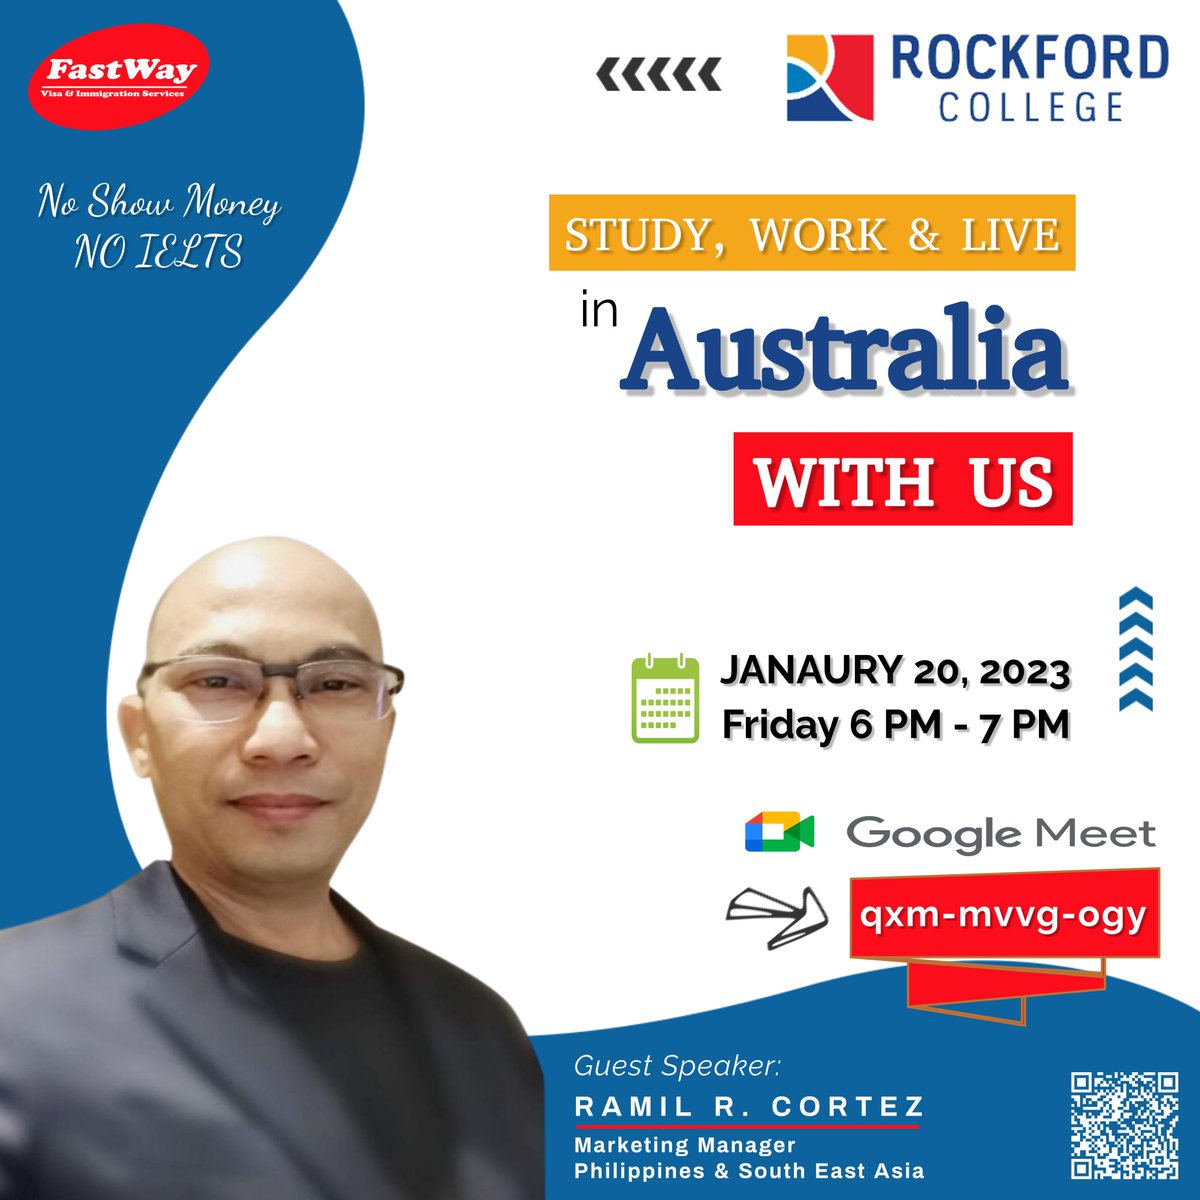 LIVE Q&A: Study in Australia! Learn about how to The Study, Work and Live in Australia. Absolutely, No Show Money and No IELTS!
#NoShowMoney #NoIELTS #Sydney #NewSouthWales #australia #freeConsultation #visaAssistance #installment